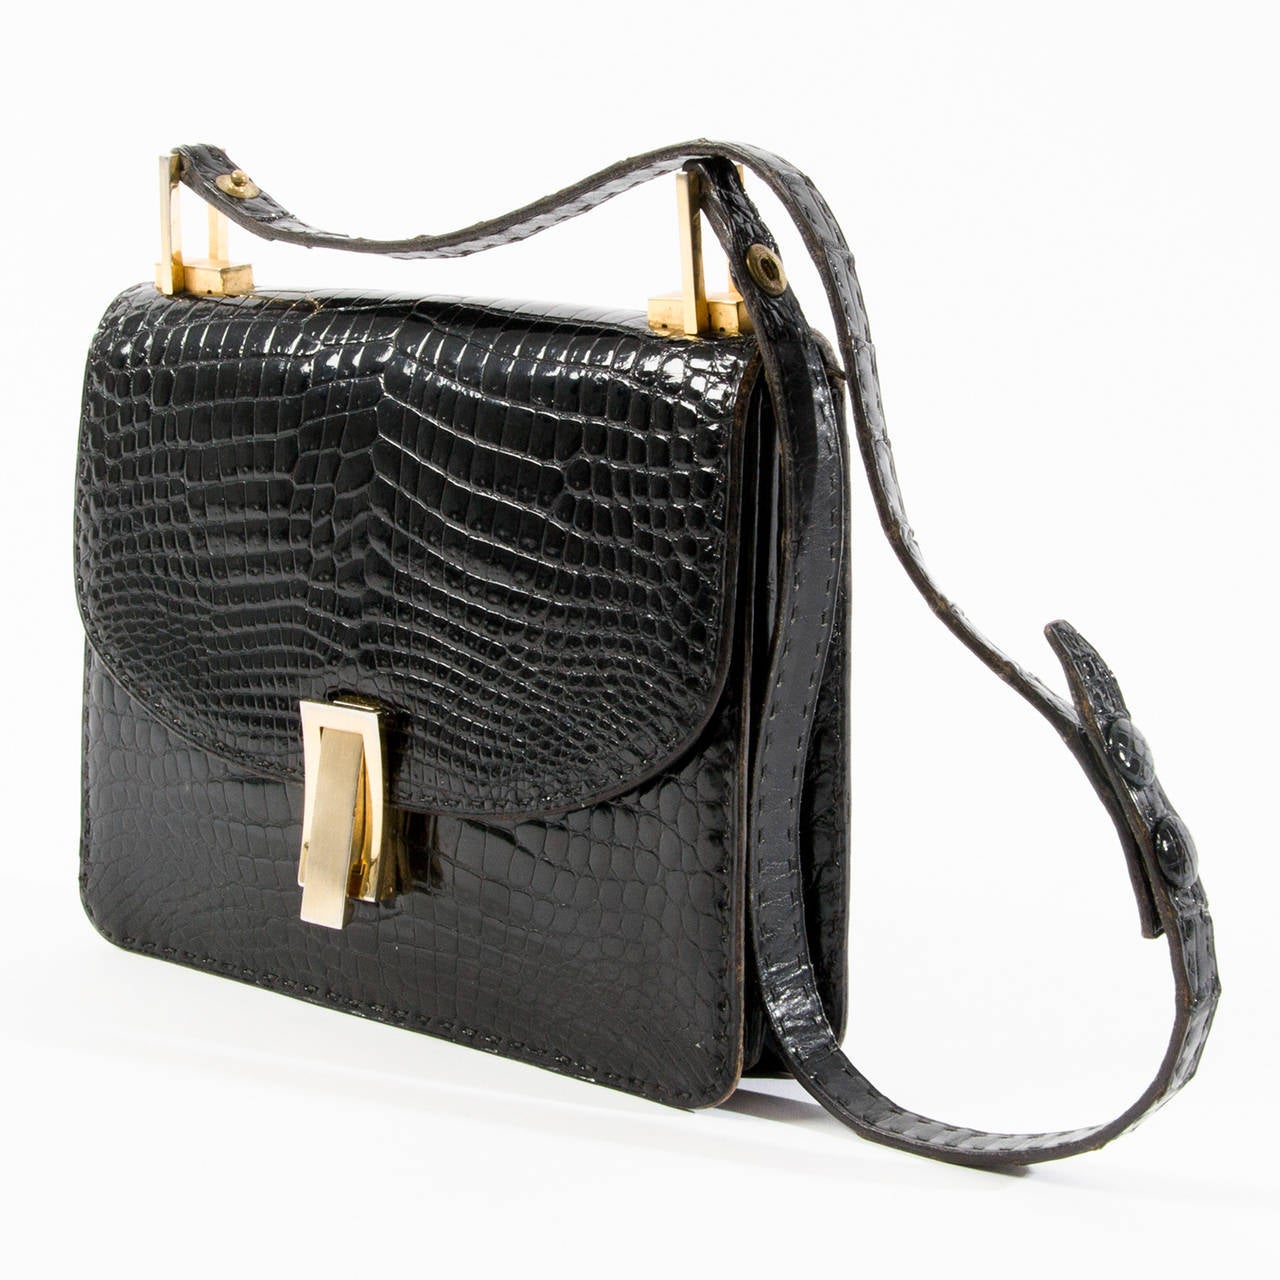 Vintage crocodile shoulder bag, perfect for a day to night look.